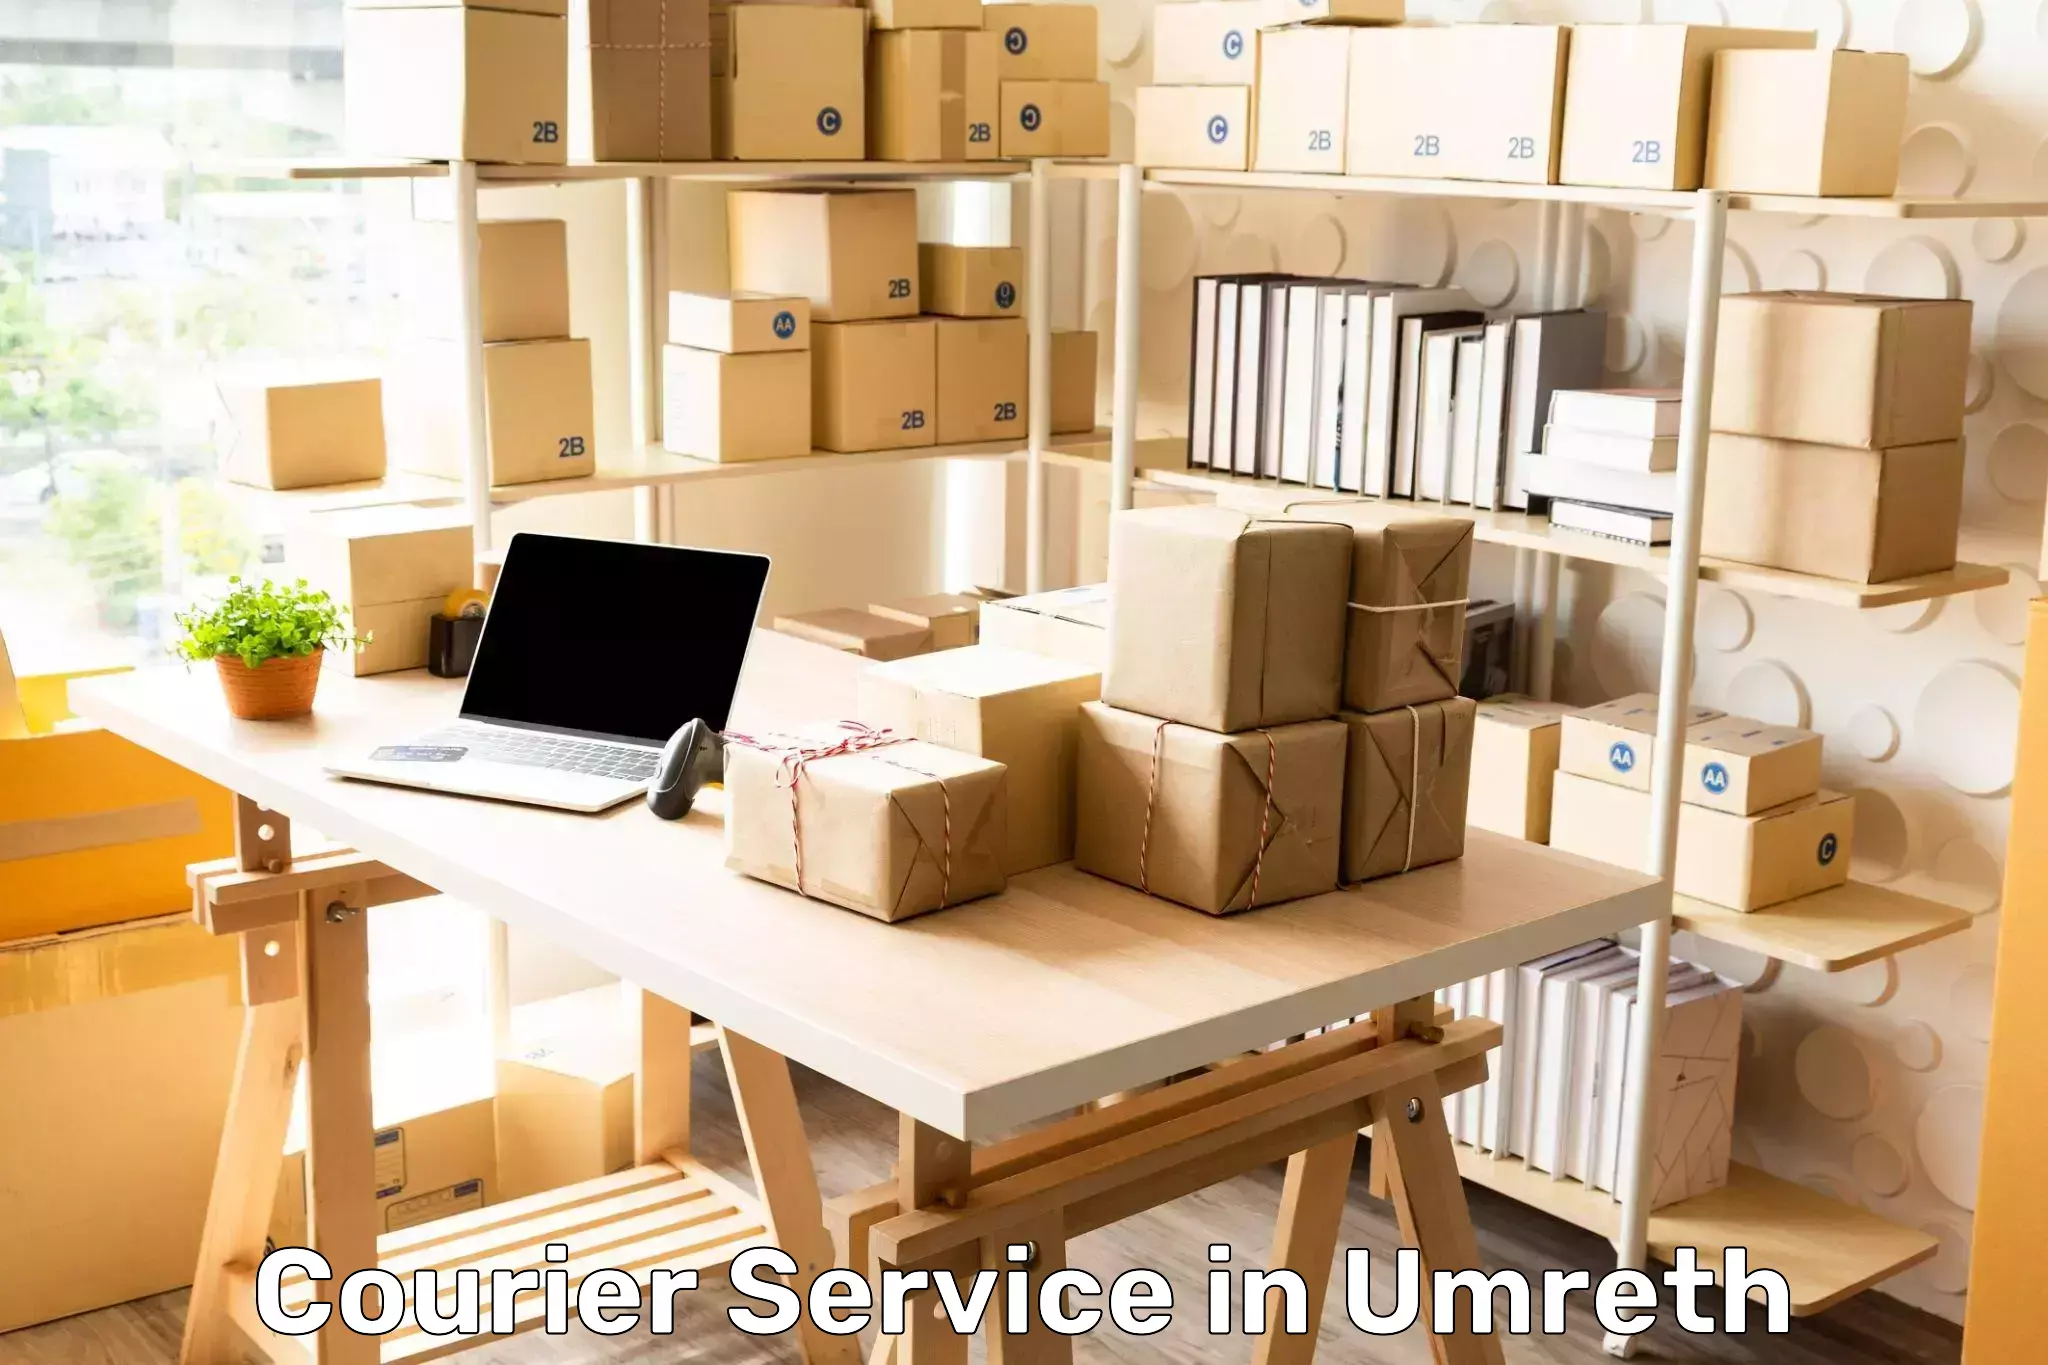 Next-day delivery options in Umreth